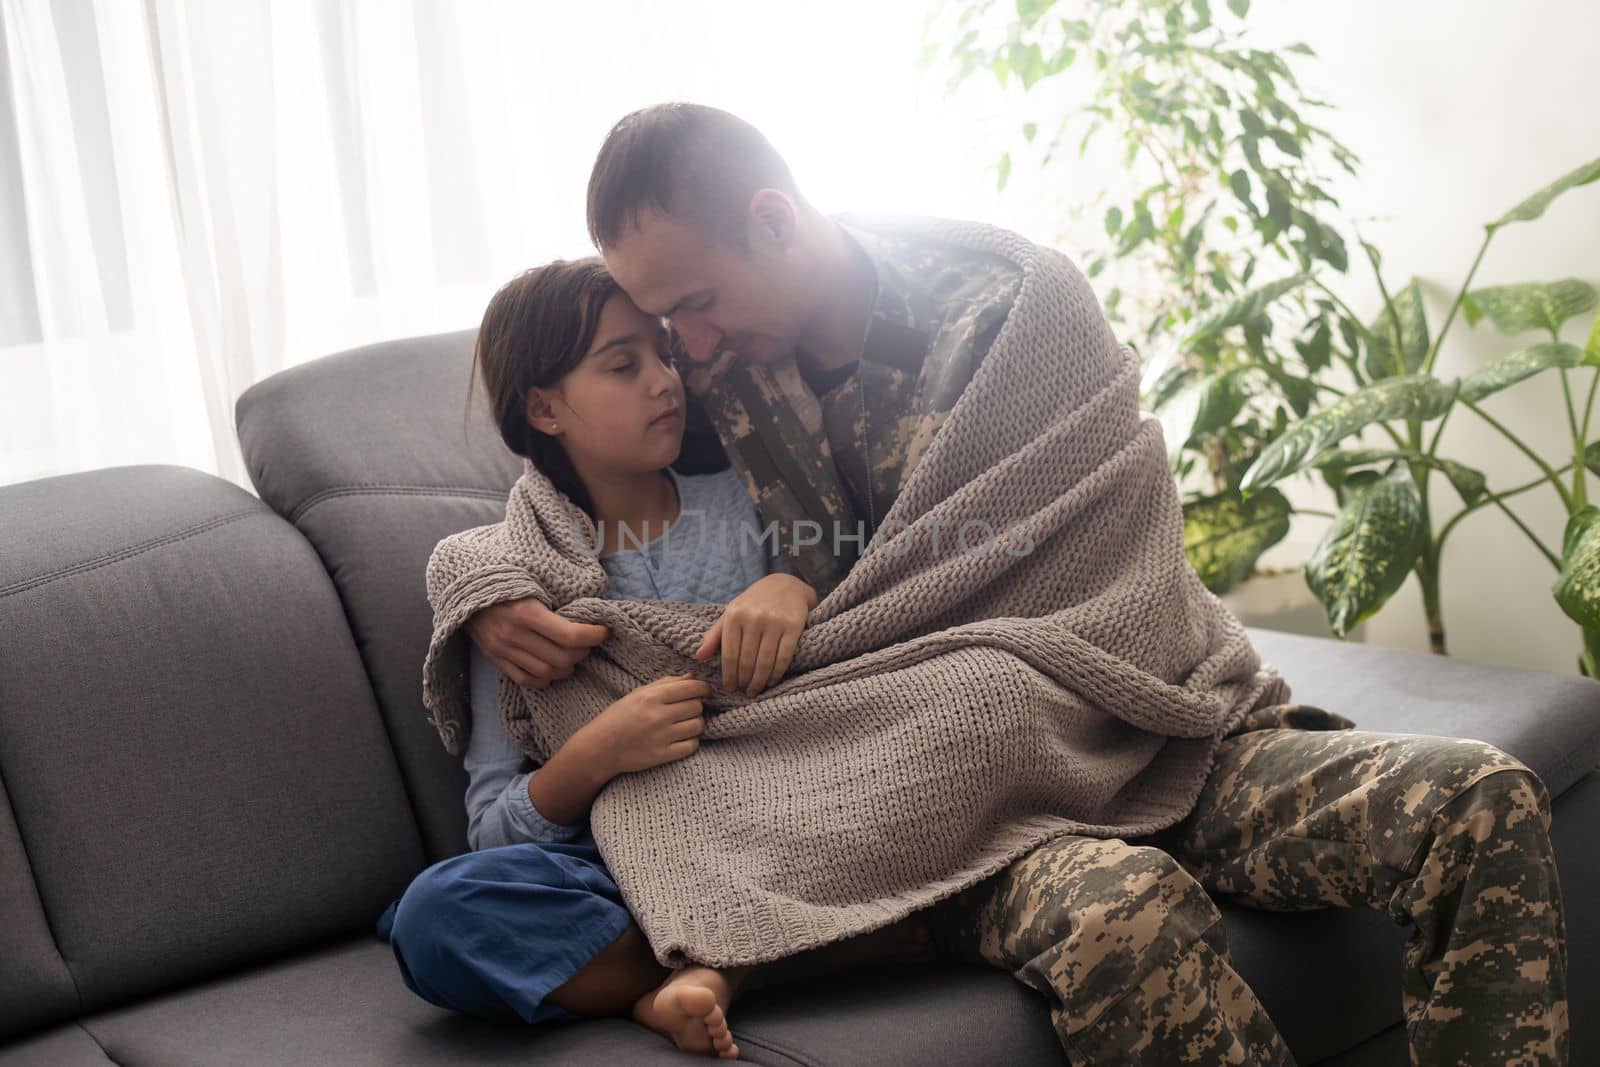 pretty little girl hugging her military father. by Andelov13